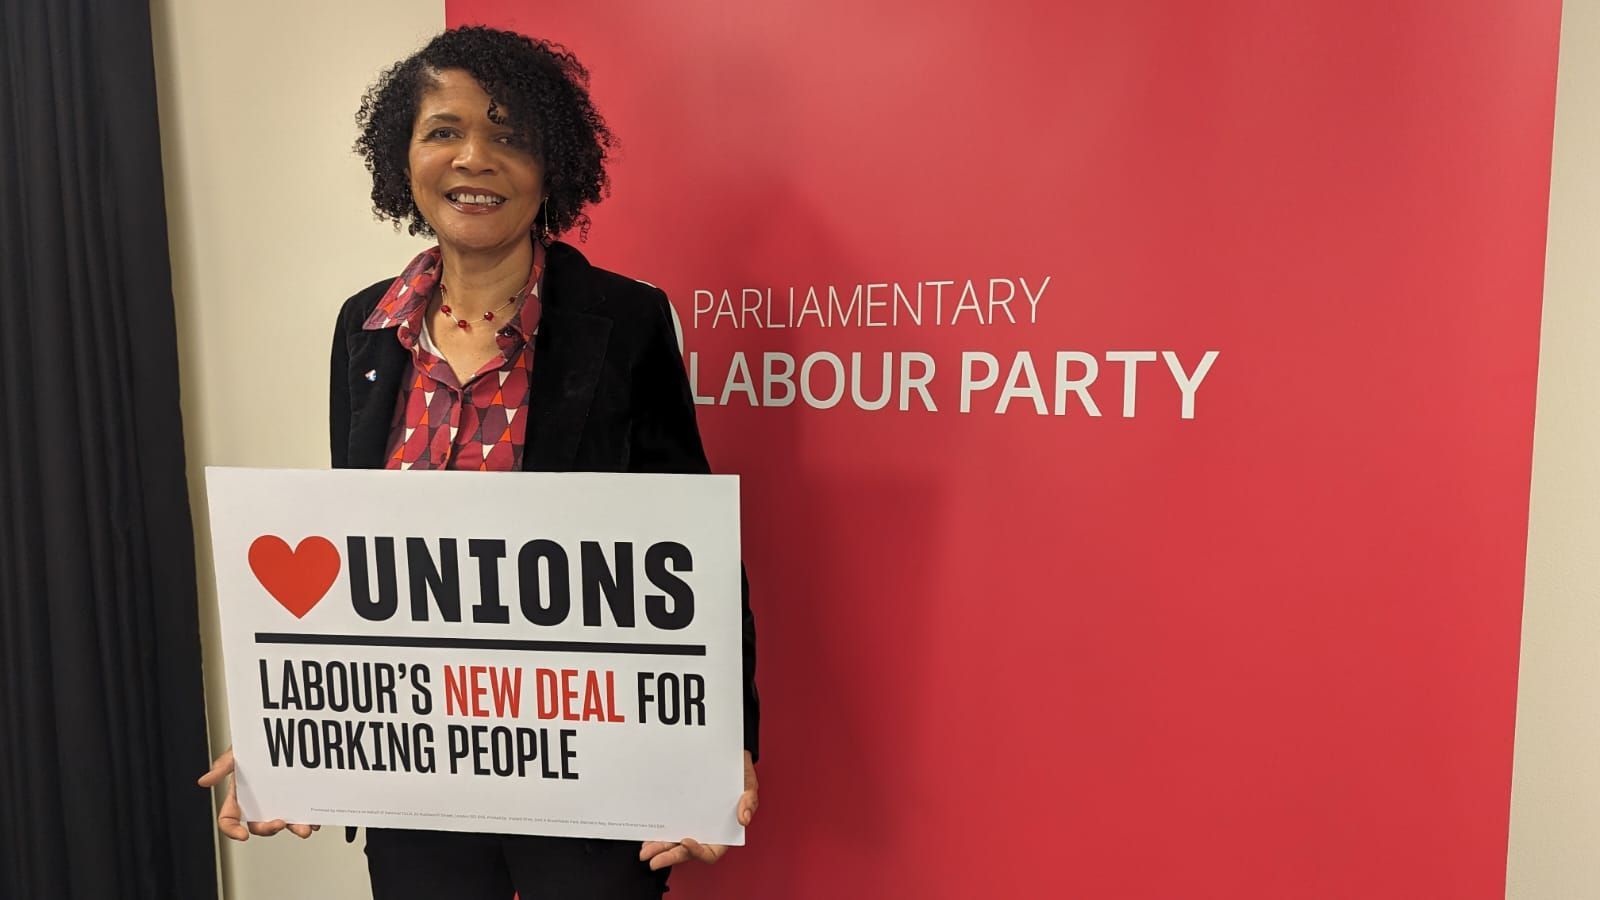 New deal for working people – Trade Unions can deliver job security, dignity, rights and respect at work.